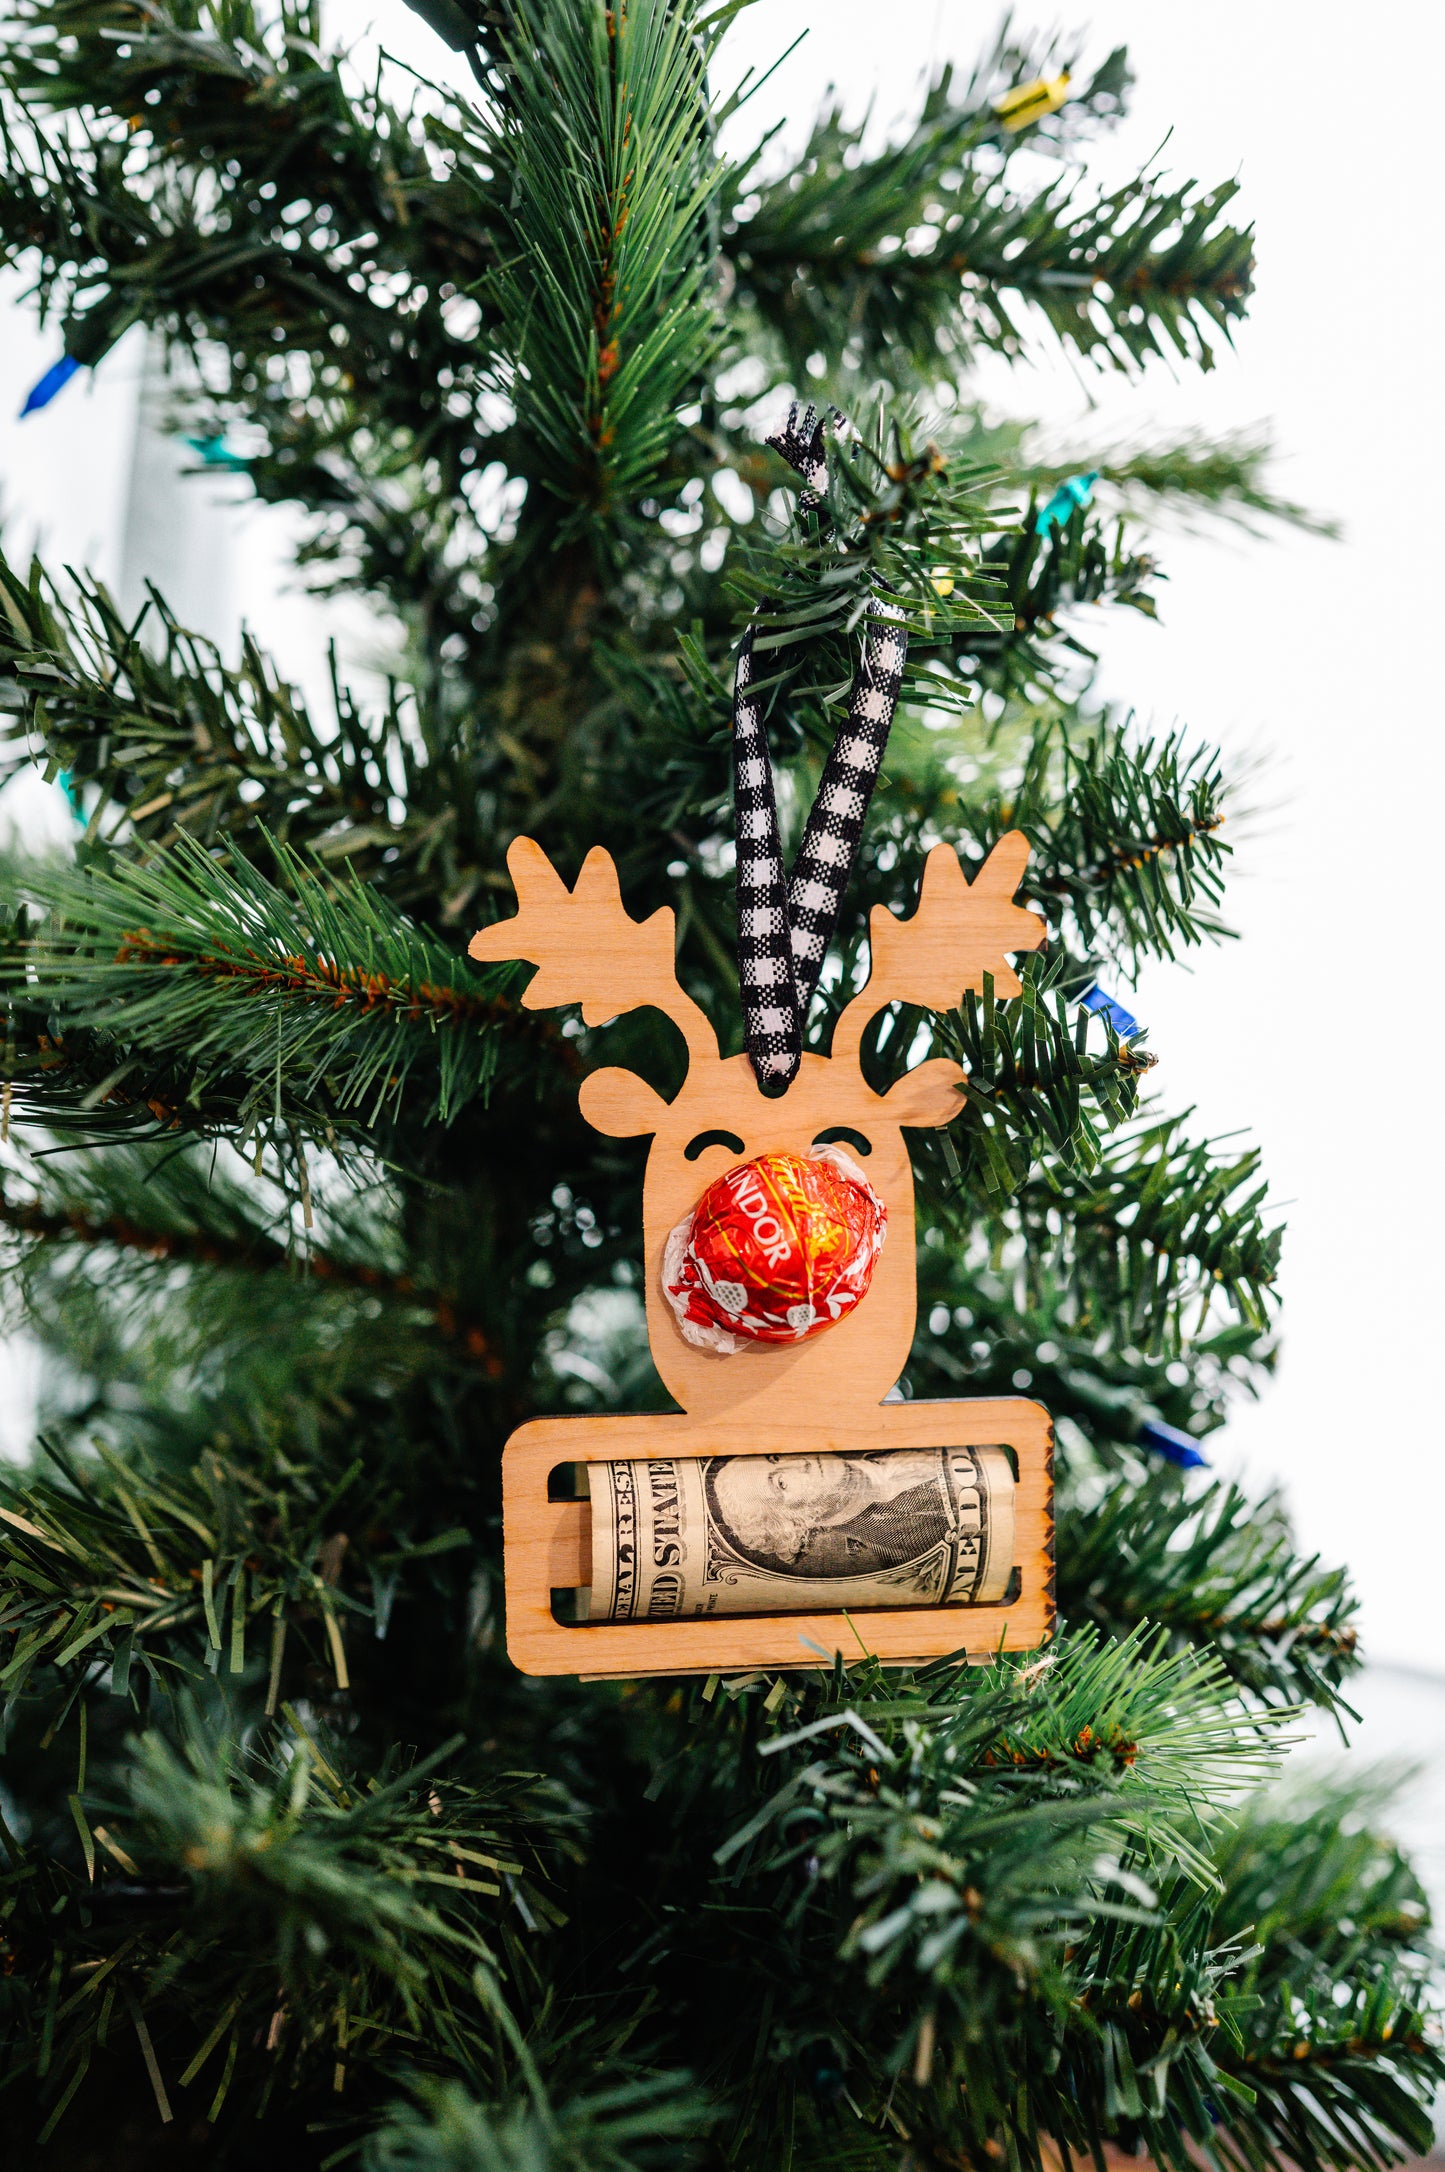 Ruddy The Red Nosed Reindeer Money Ornament